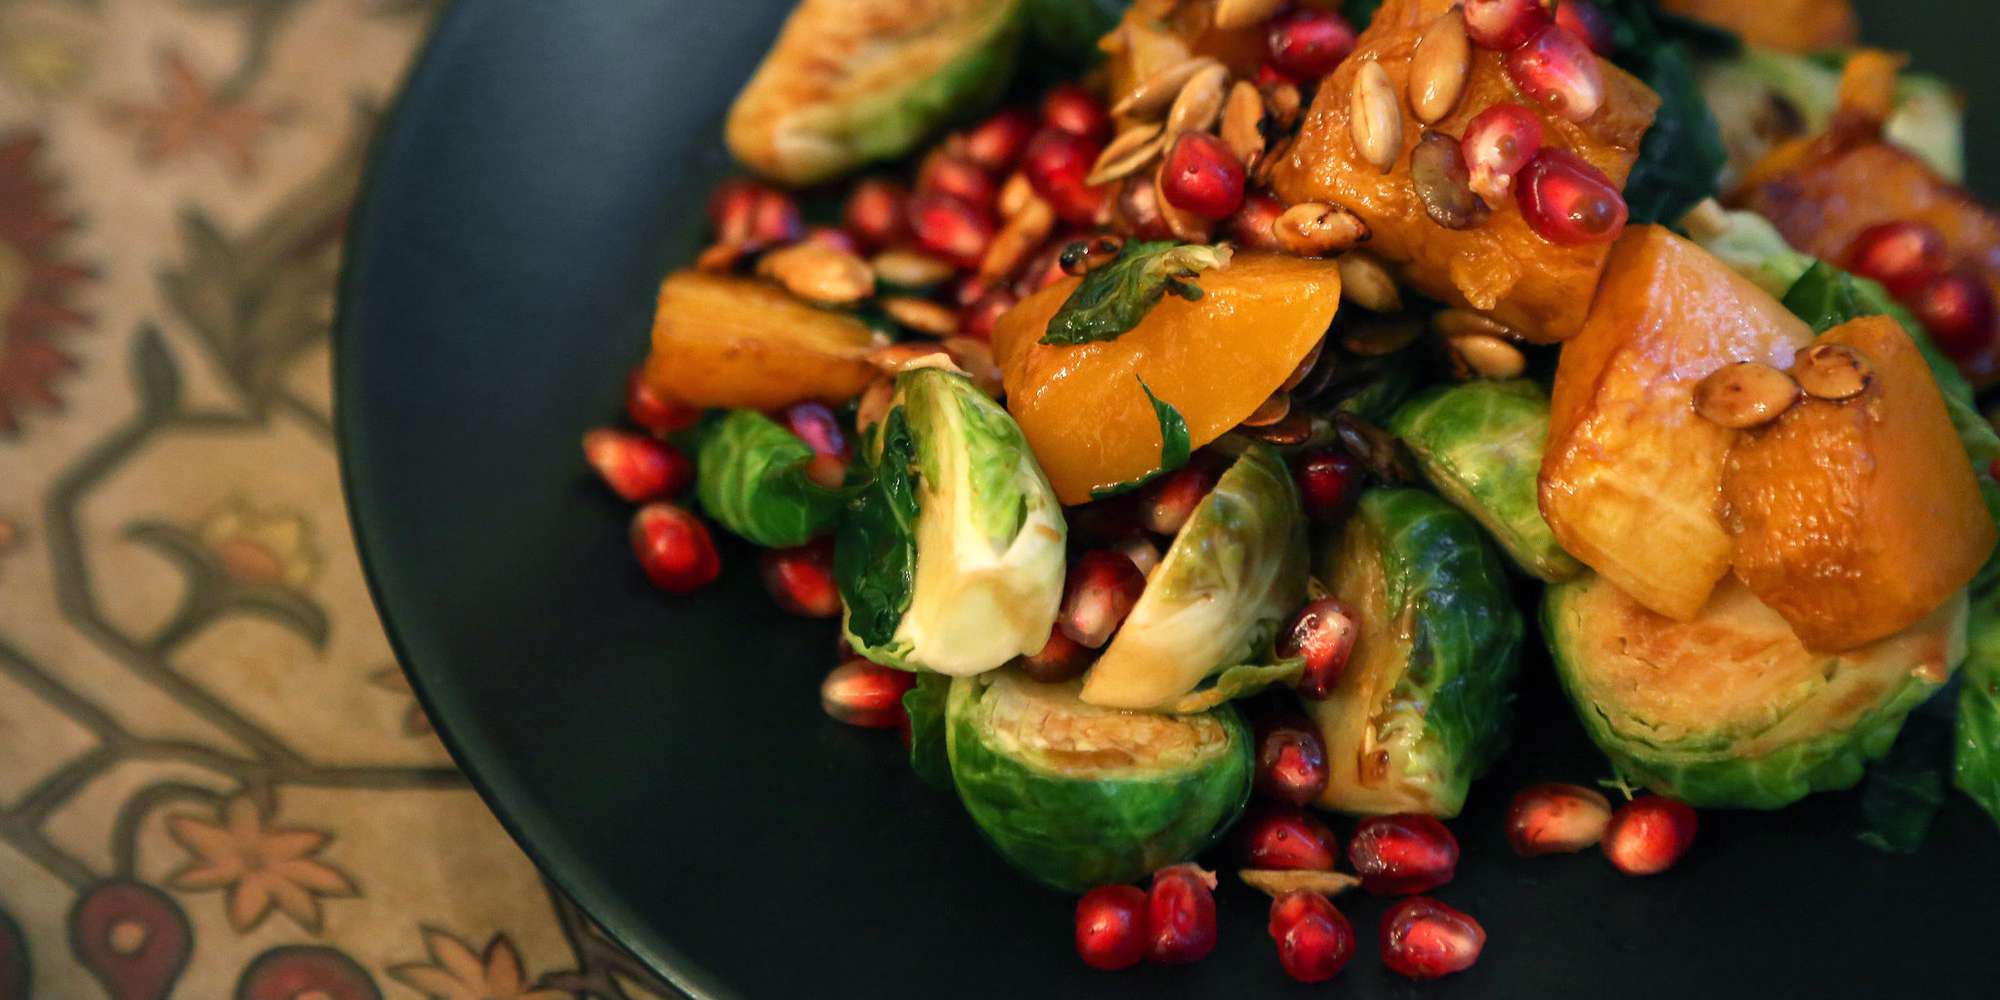 Warm Brussel Sprout Balsamic Salad